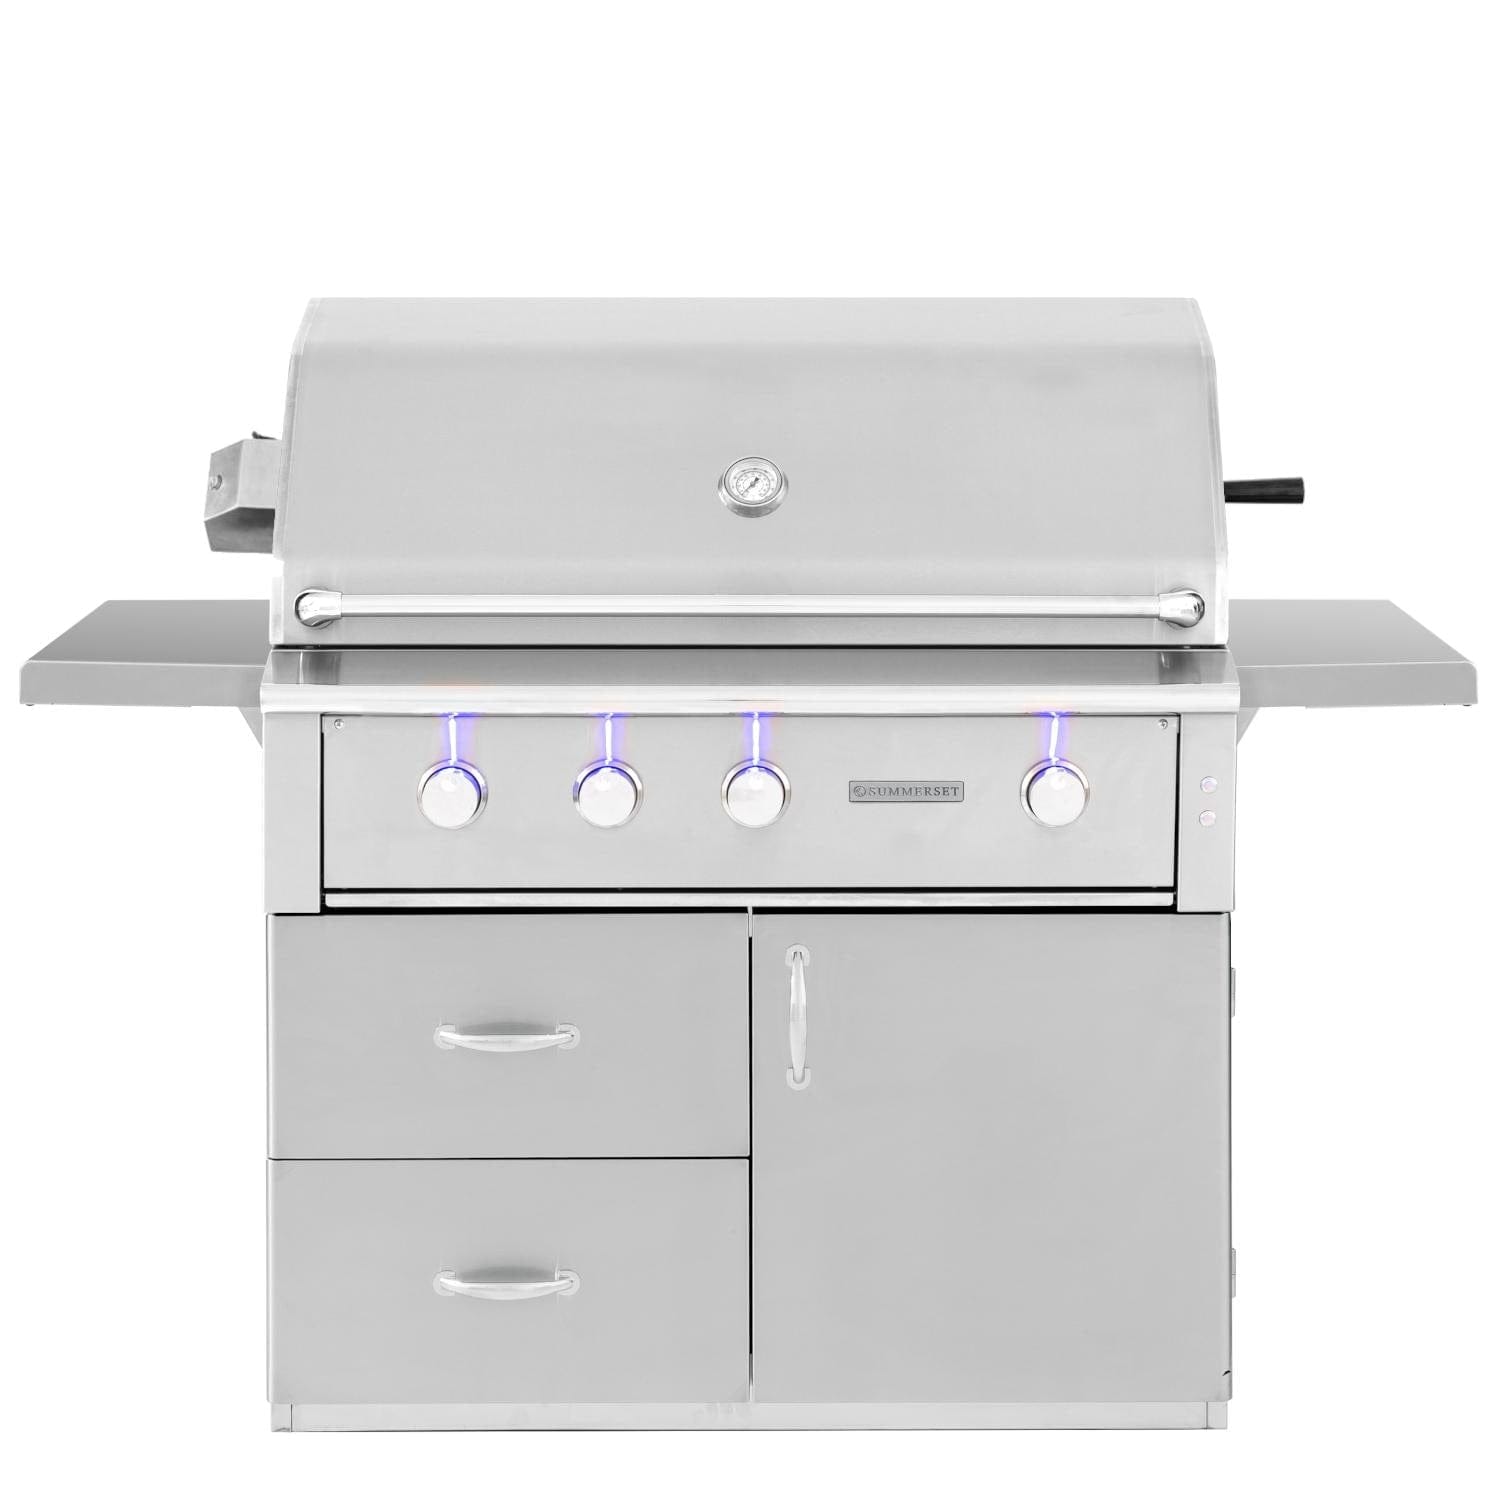 Summerset Grills Luxury Gas Grill Propane Summerset Alturi 42-Inch 3-Burner Free Standing | Natural Gas OR Propane | Gas Grill With Stainless Steel Burners & Rotisserie - ALT42T